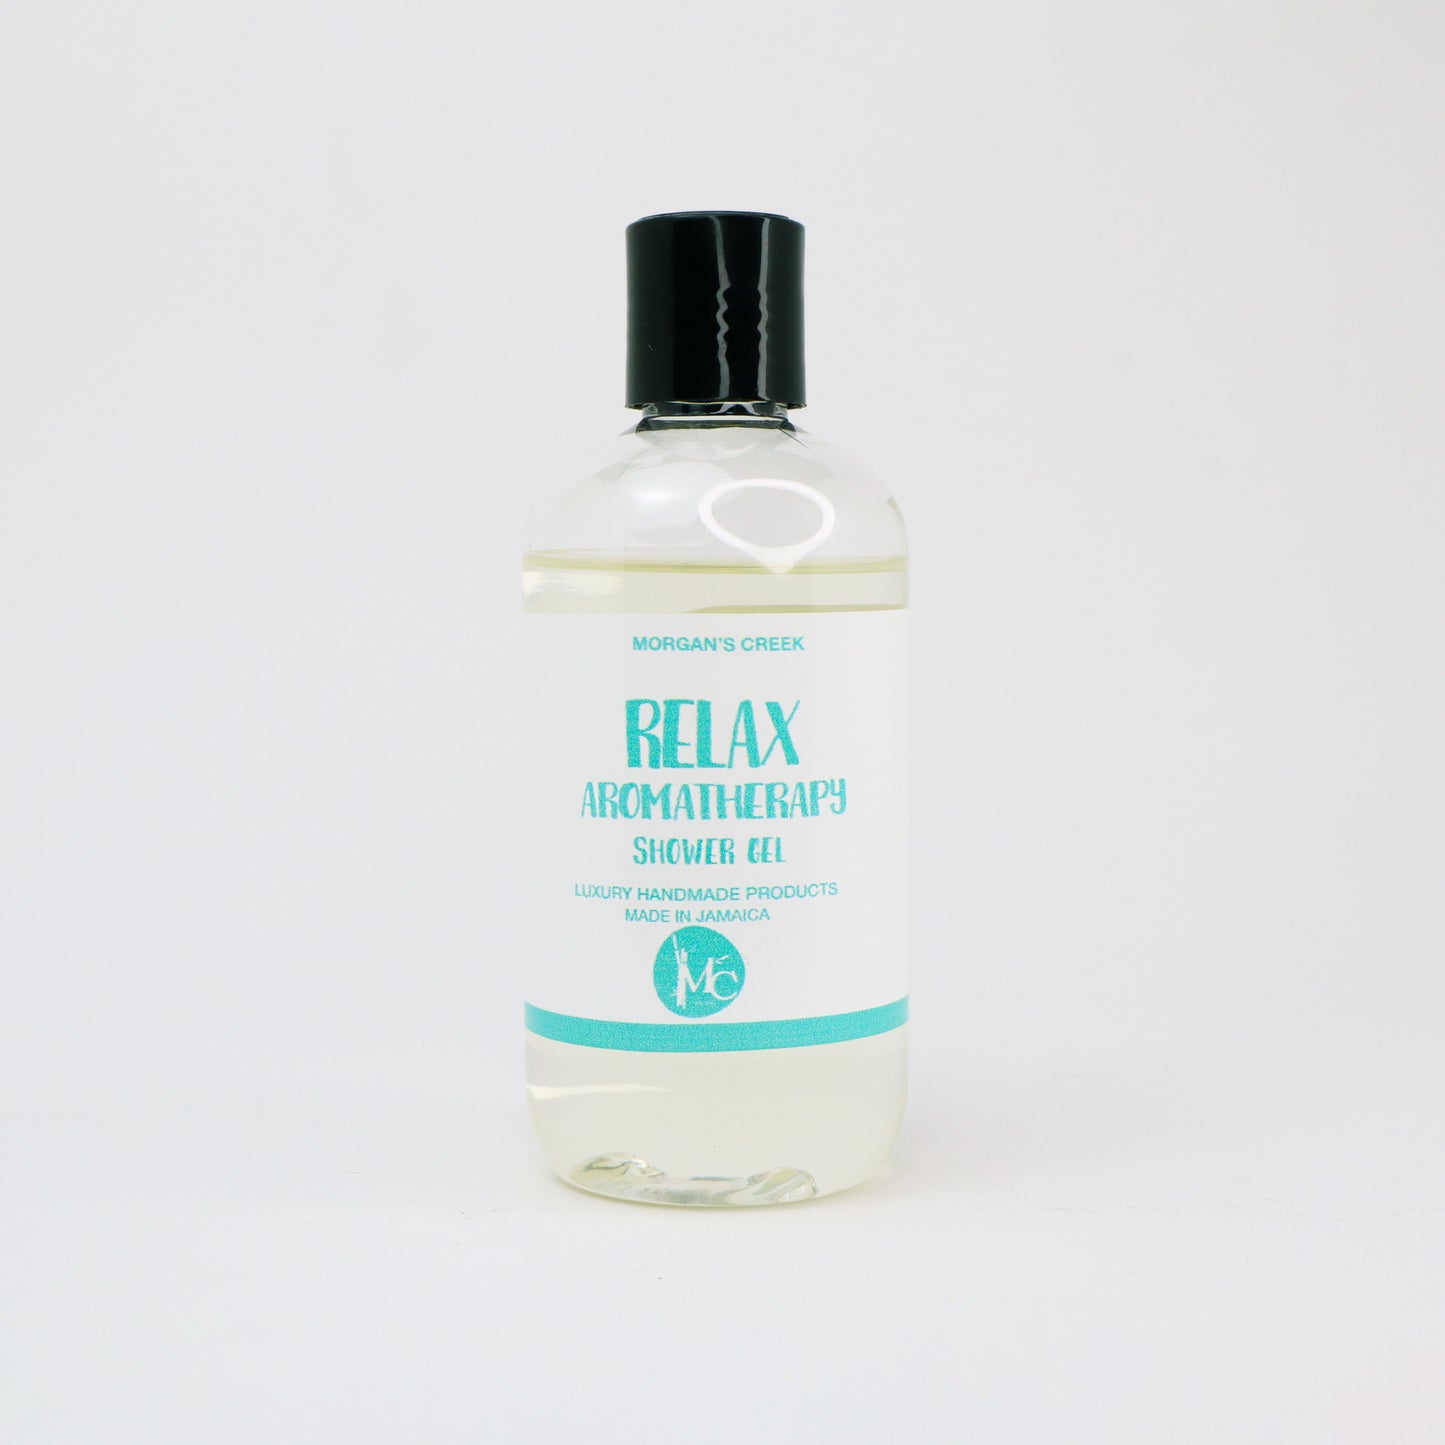 Relax Aromatherapy Shower Gel by Morgan's Creek